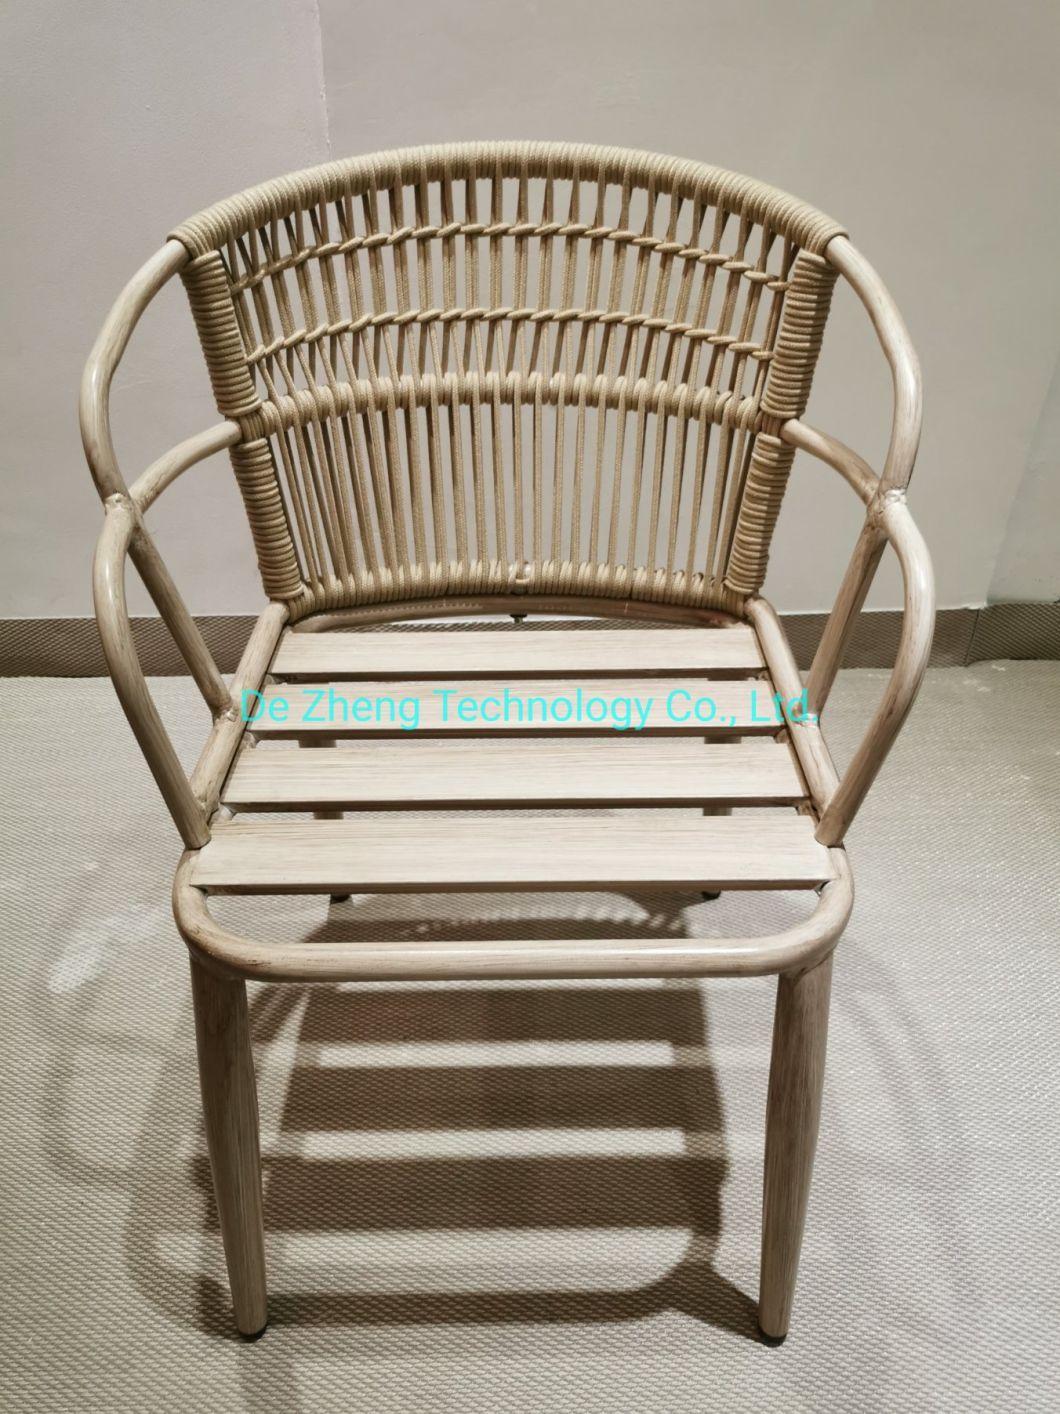 Factory Price High Quality Garden Multi Purpose Rope Arm Aluminum Frame Dining Chair Outdoor Garden